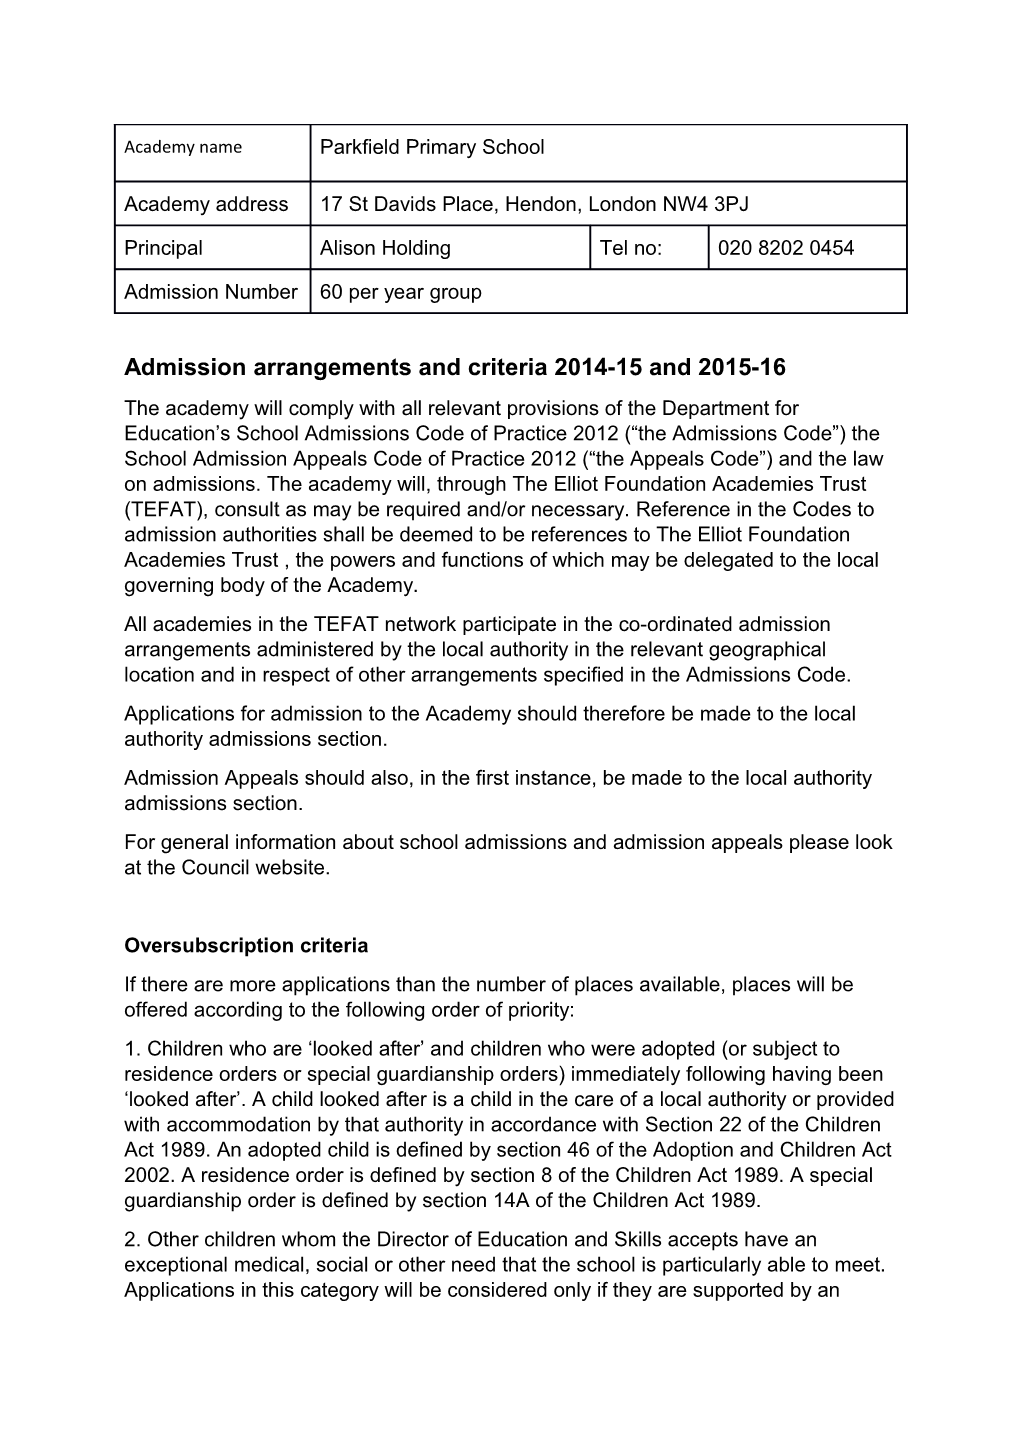 Admission Arrangements and Criteria 2014-15 and 2015-16